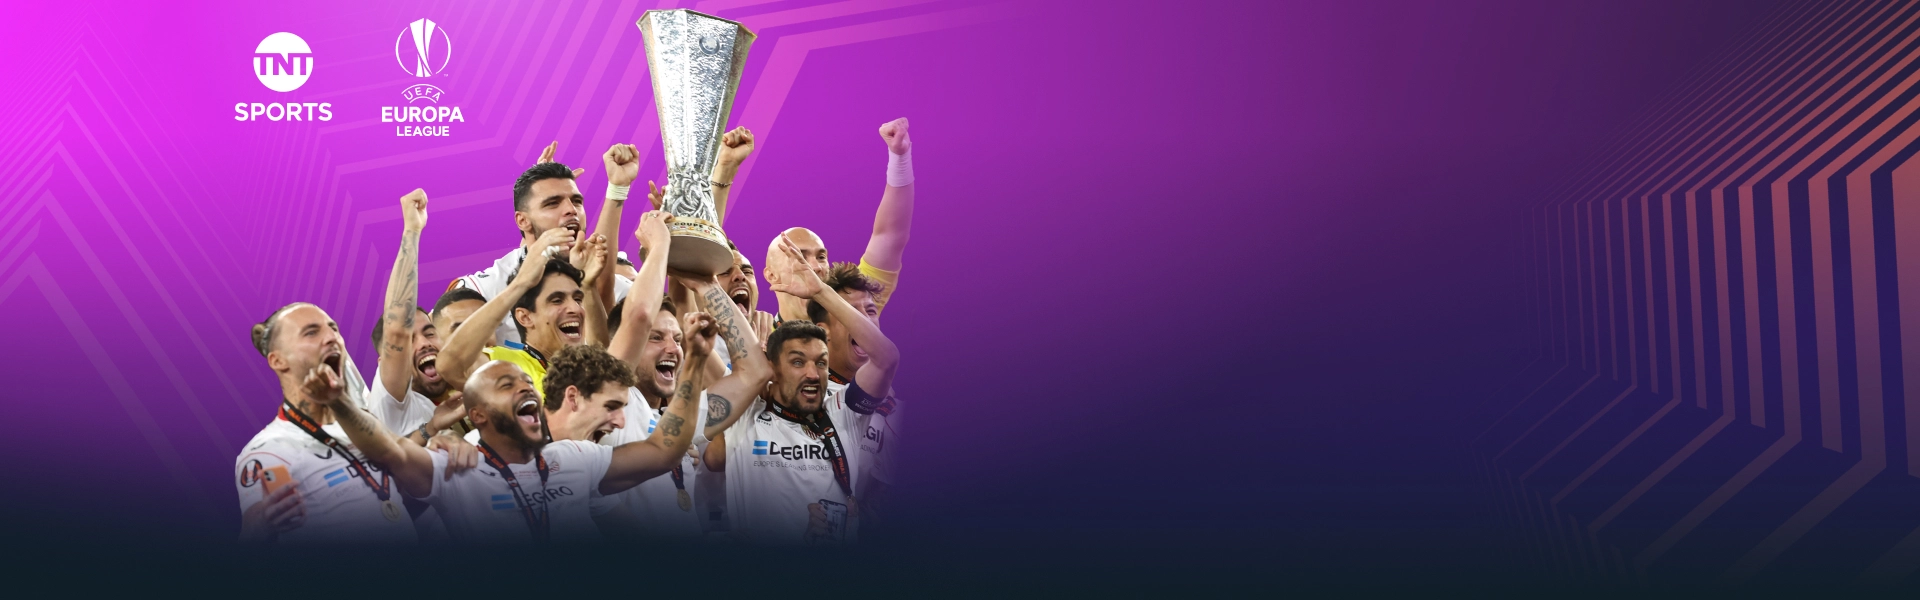 TNT Sports on X: BT Sport is making the 2019 UEFA Champions League and Europa  League finals the best connected finals ever! • BT Sport App for mobile📱or  TV 📺 • BT